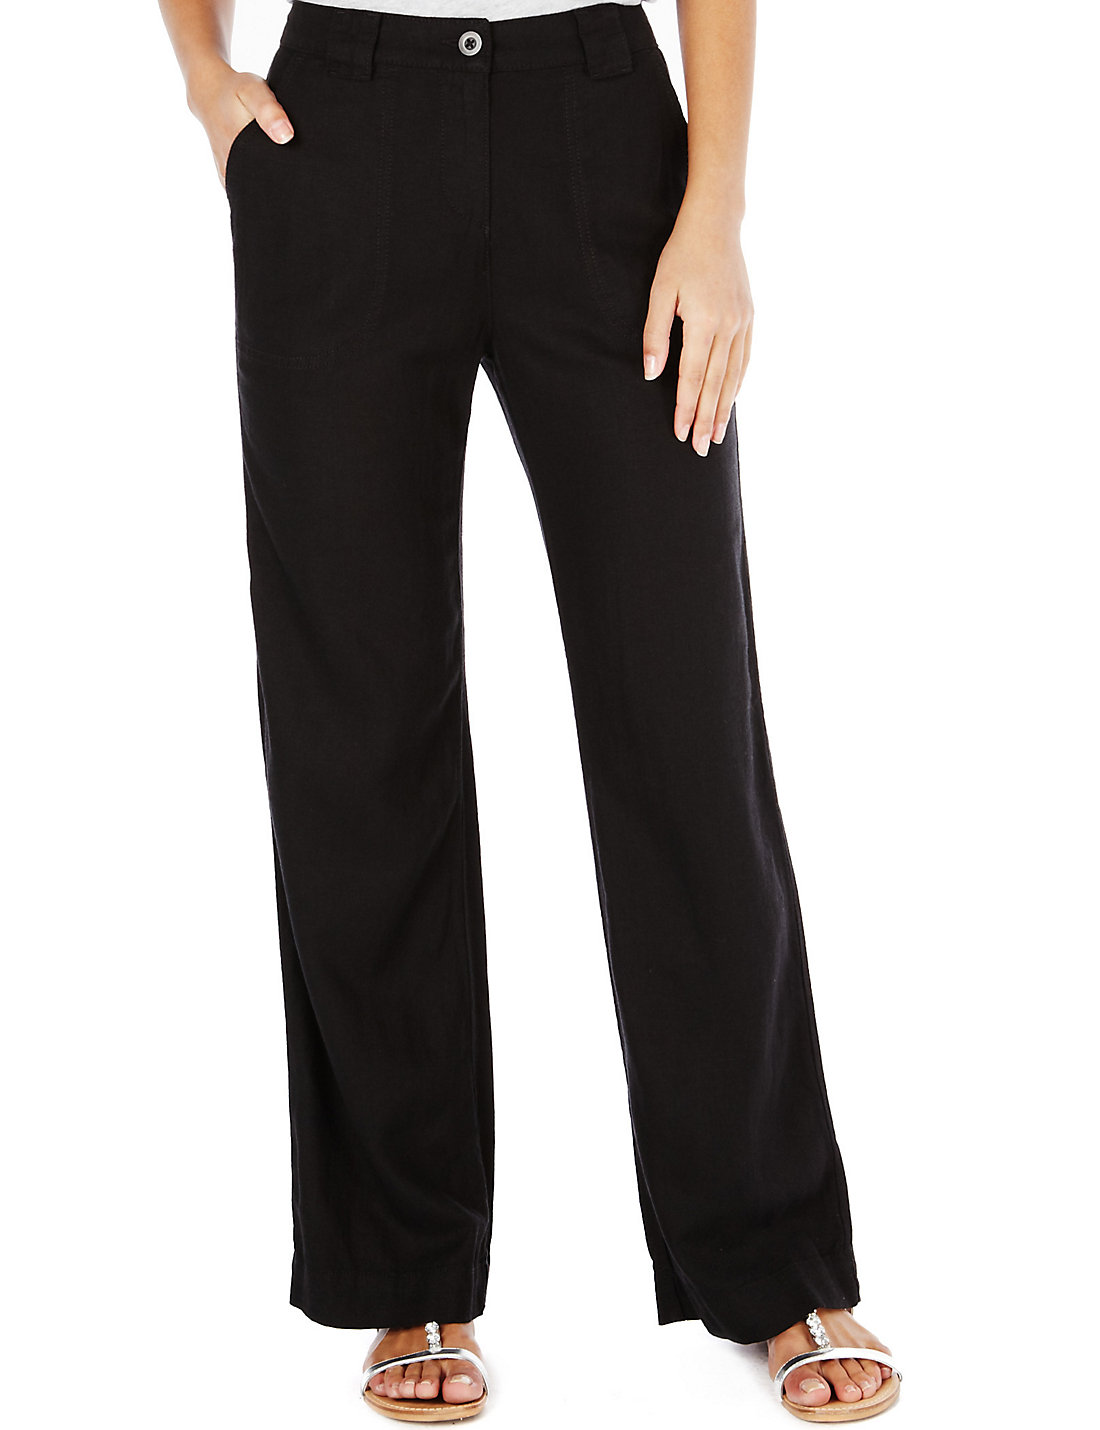 Marks and Spencer - - M&5 BLACK Linen Blend Wide Leg Trousers - Size 10 ...